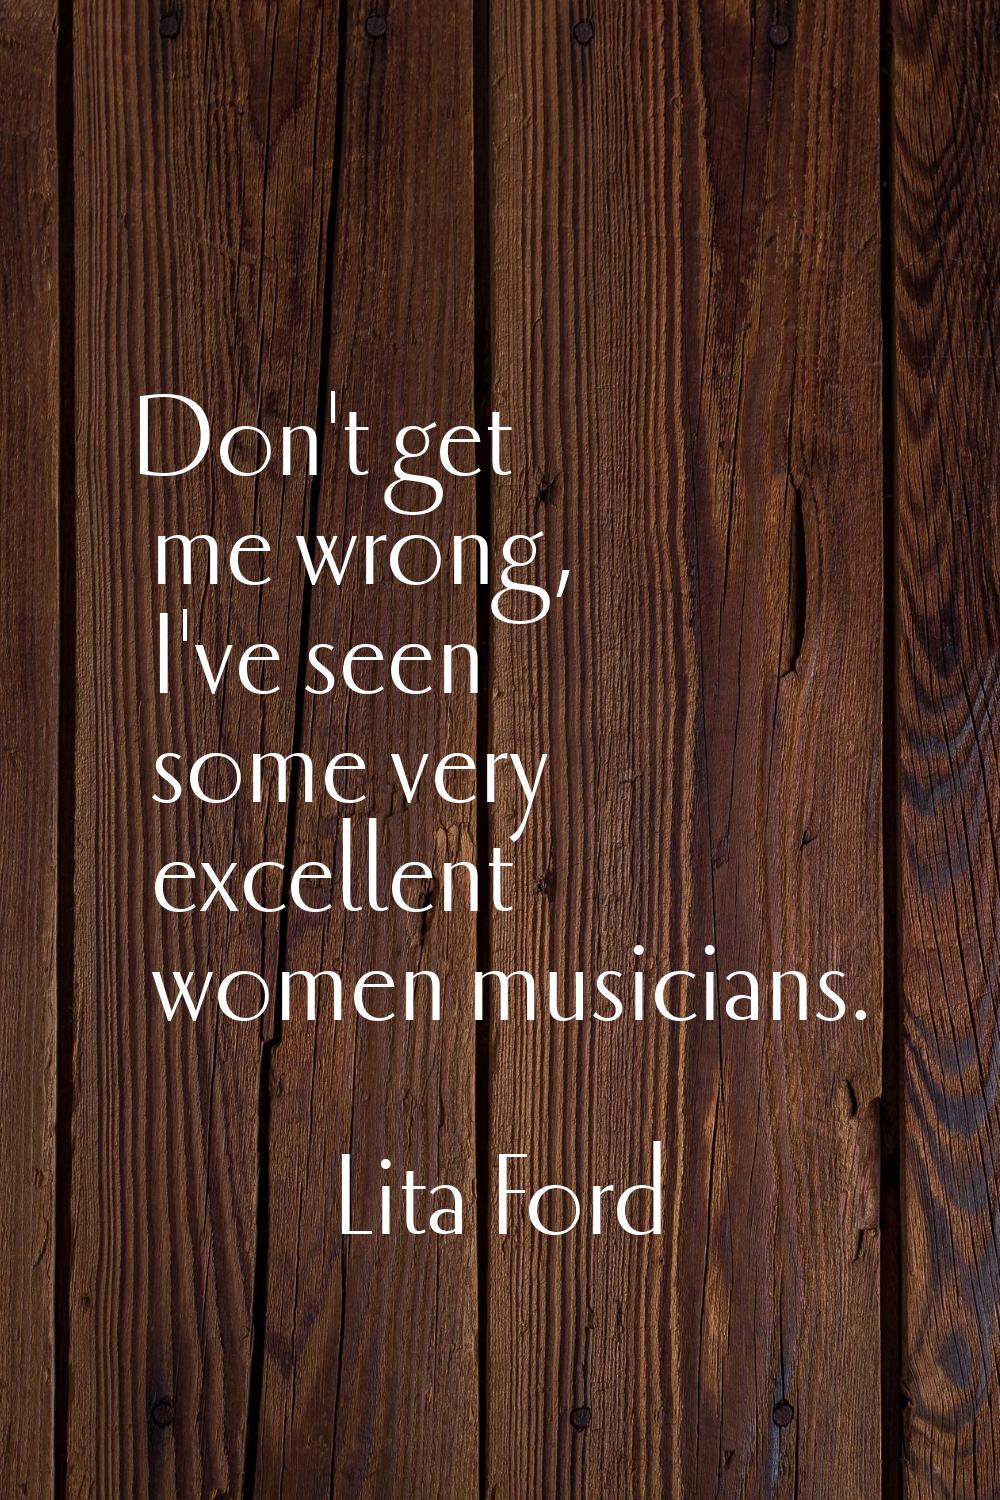 Don't get me wrong, I've seen some very excellent women musicians.